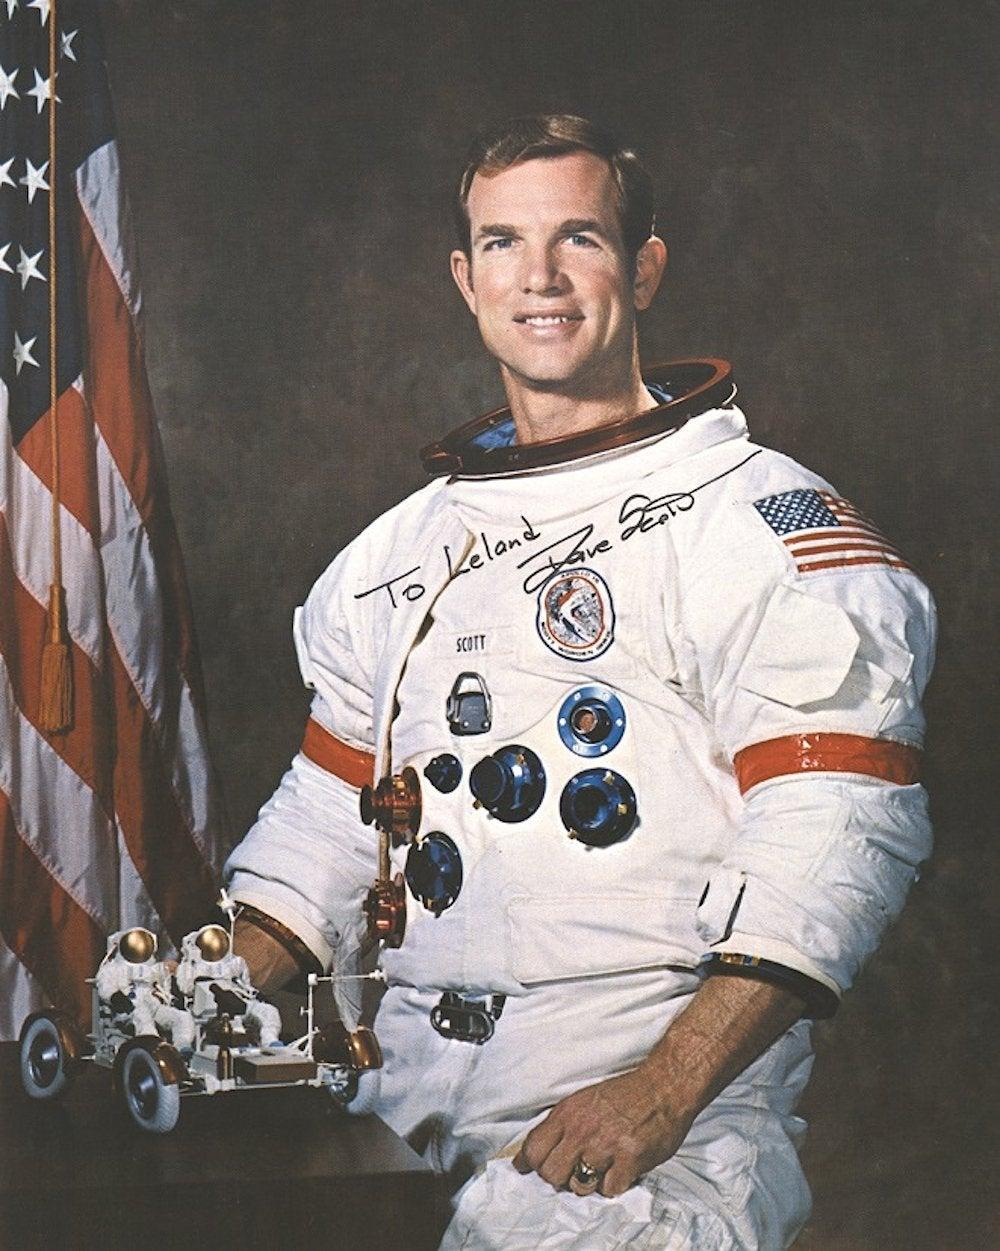 A signed photograph of Apollo 15 astronaut Dave Scott, the seventh man on the moon

David Scott (1932 -) is an American aviator and NASA astronaut who became the seventh man to walk on the moon during the Apollo 15 mission in July 1971.

Scott